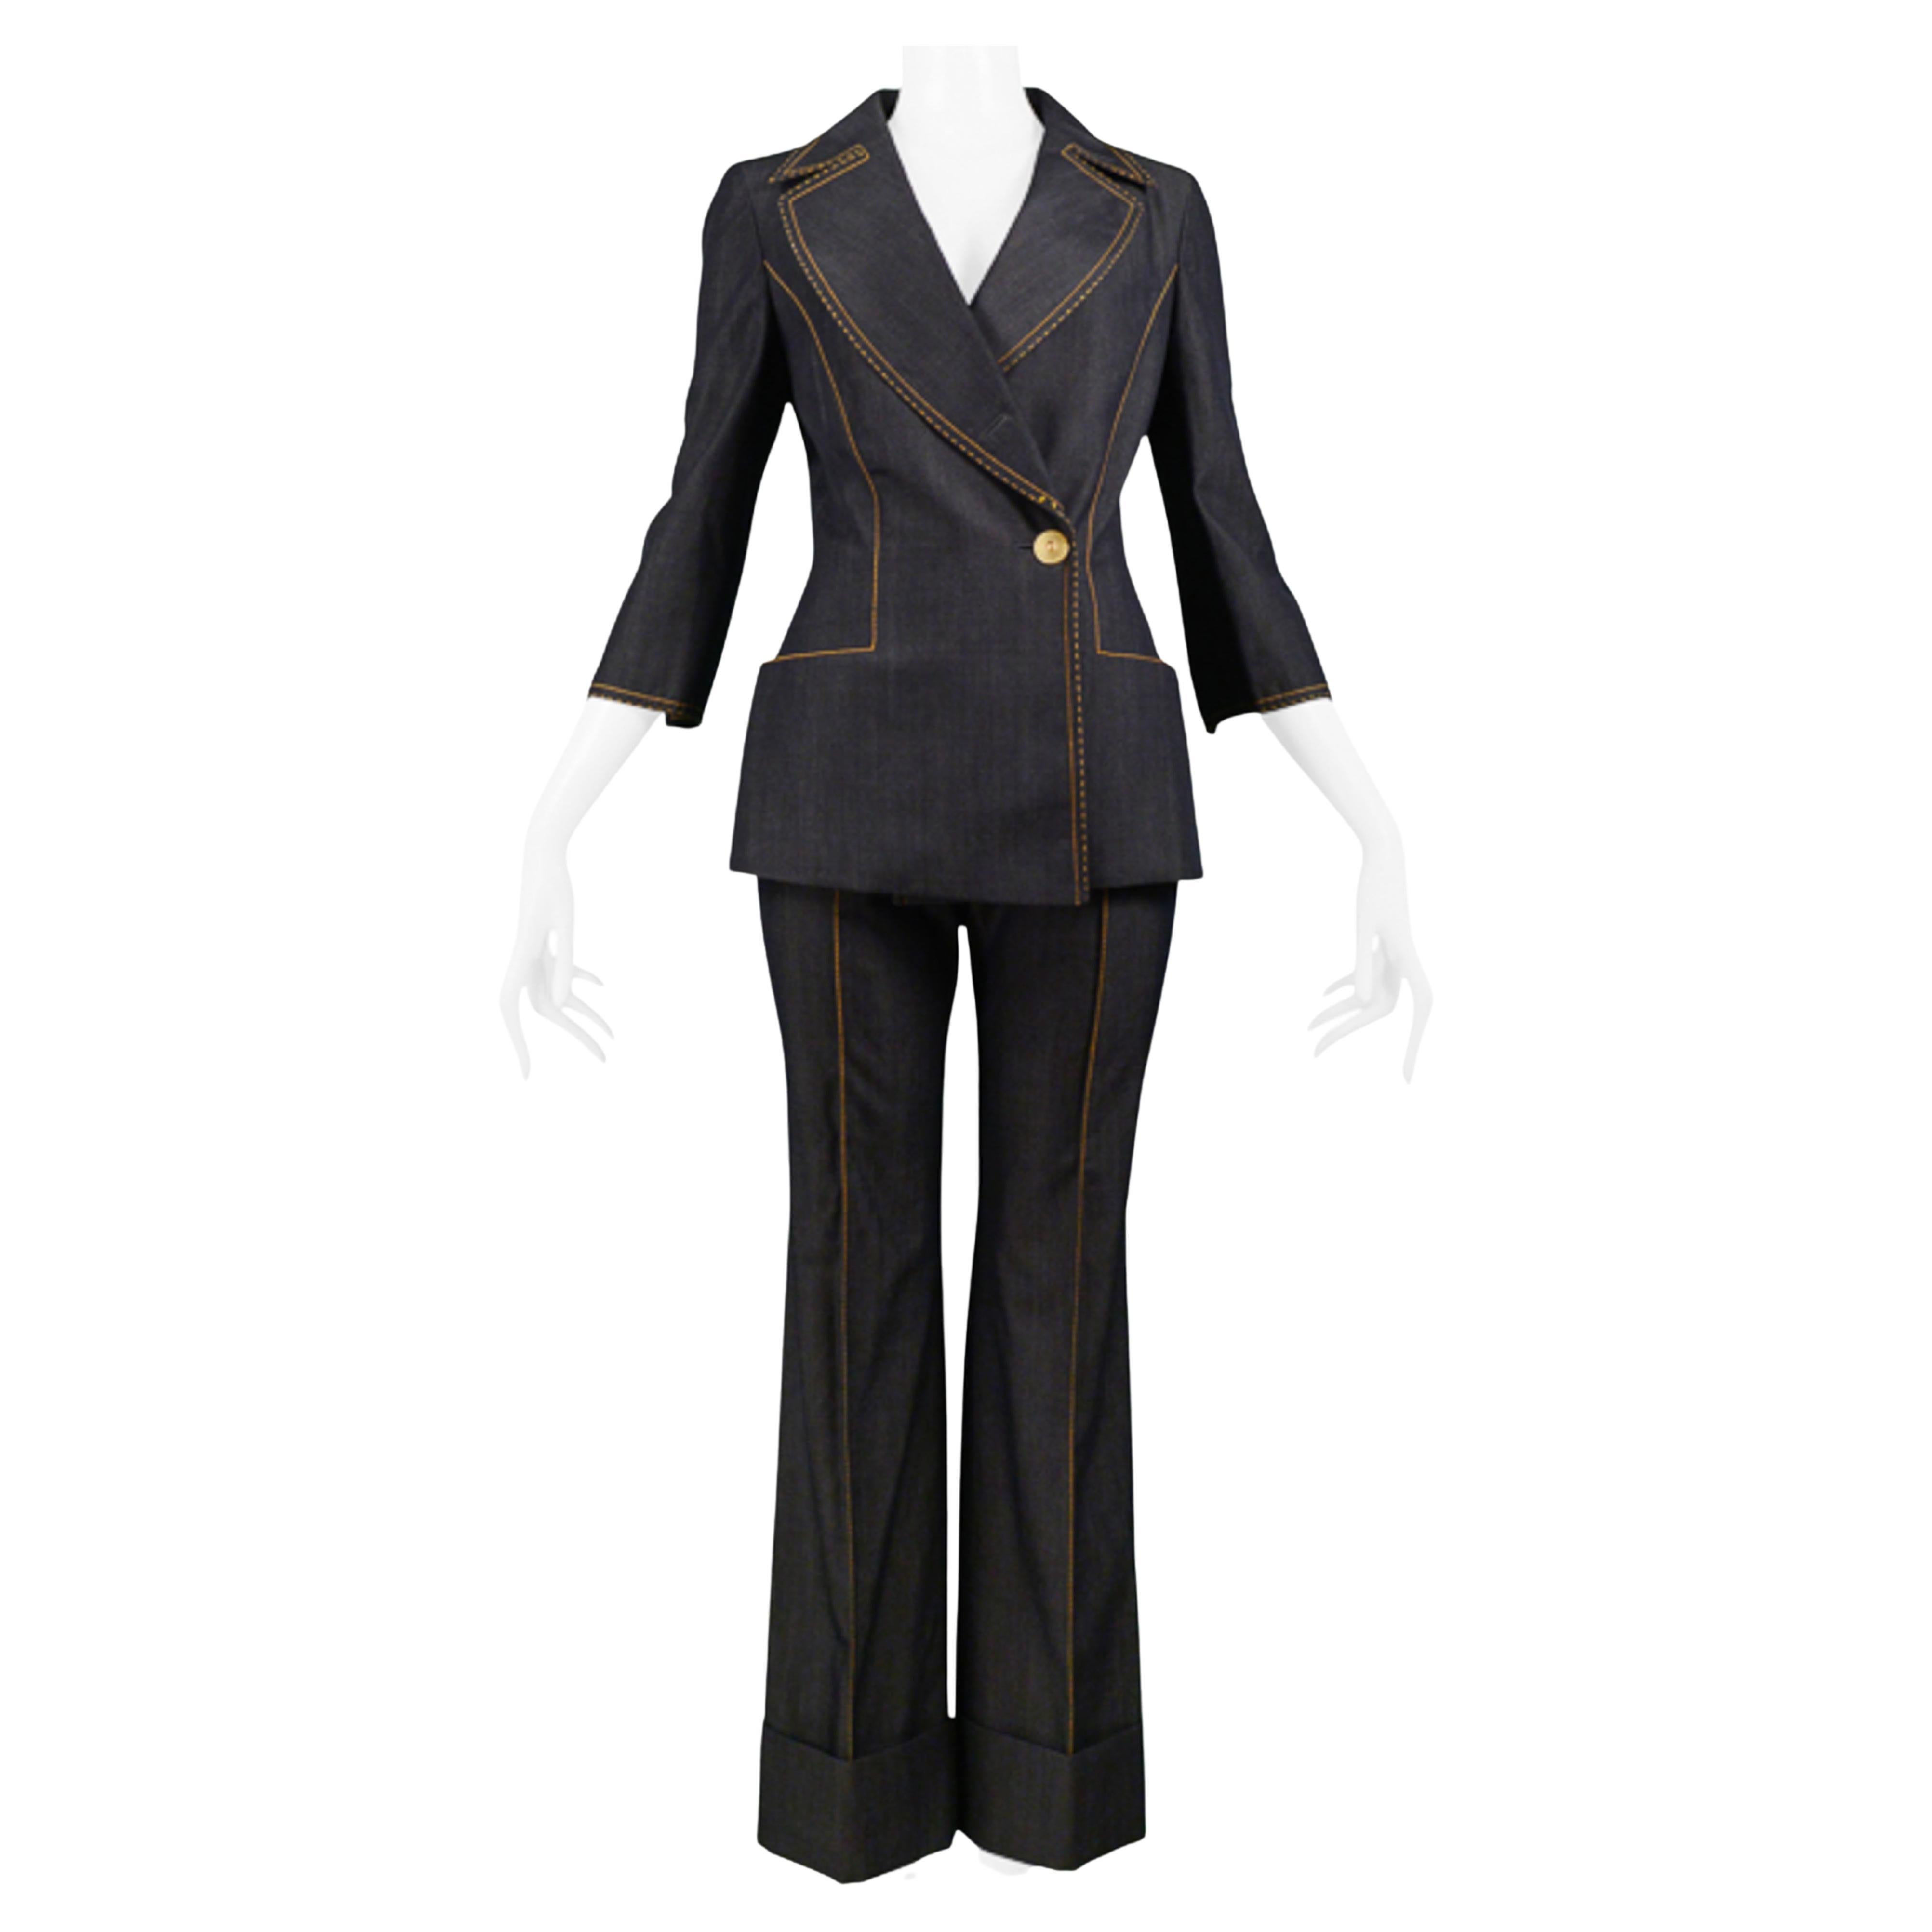 Gianfranco Ferre Denim Inspired Wool Suit With Yellow Stitching 1999 For Sale